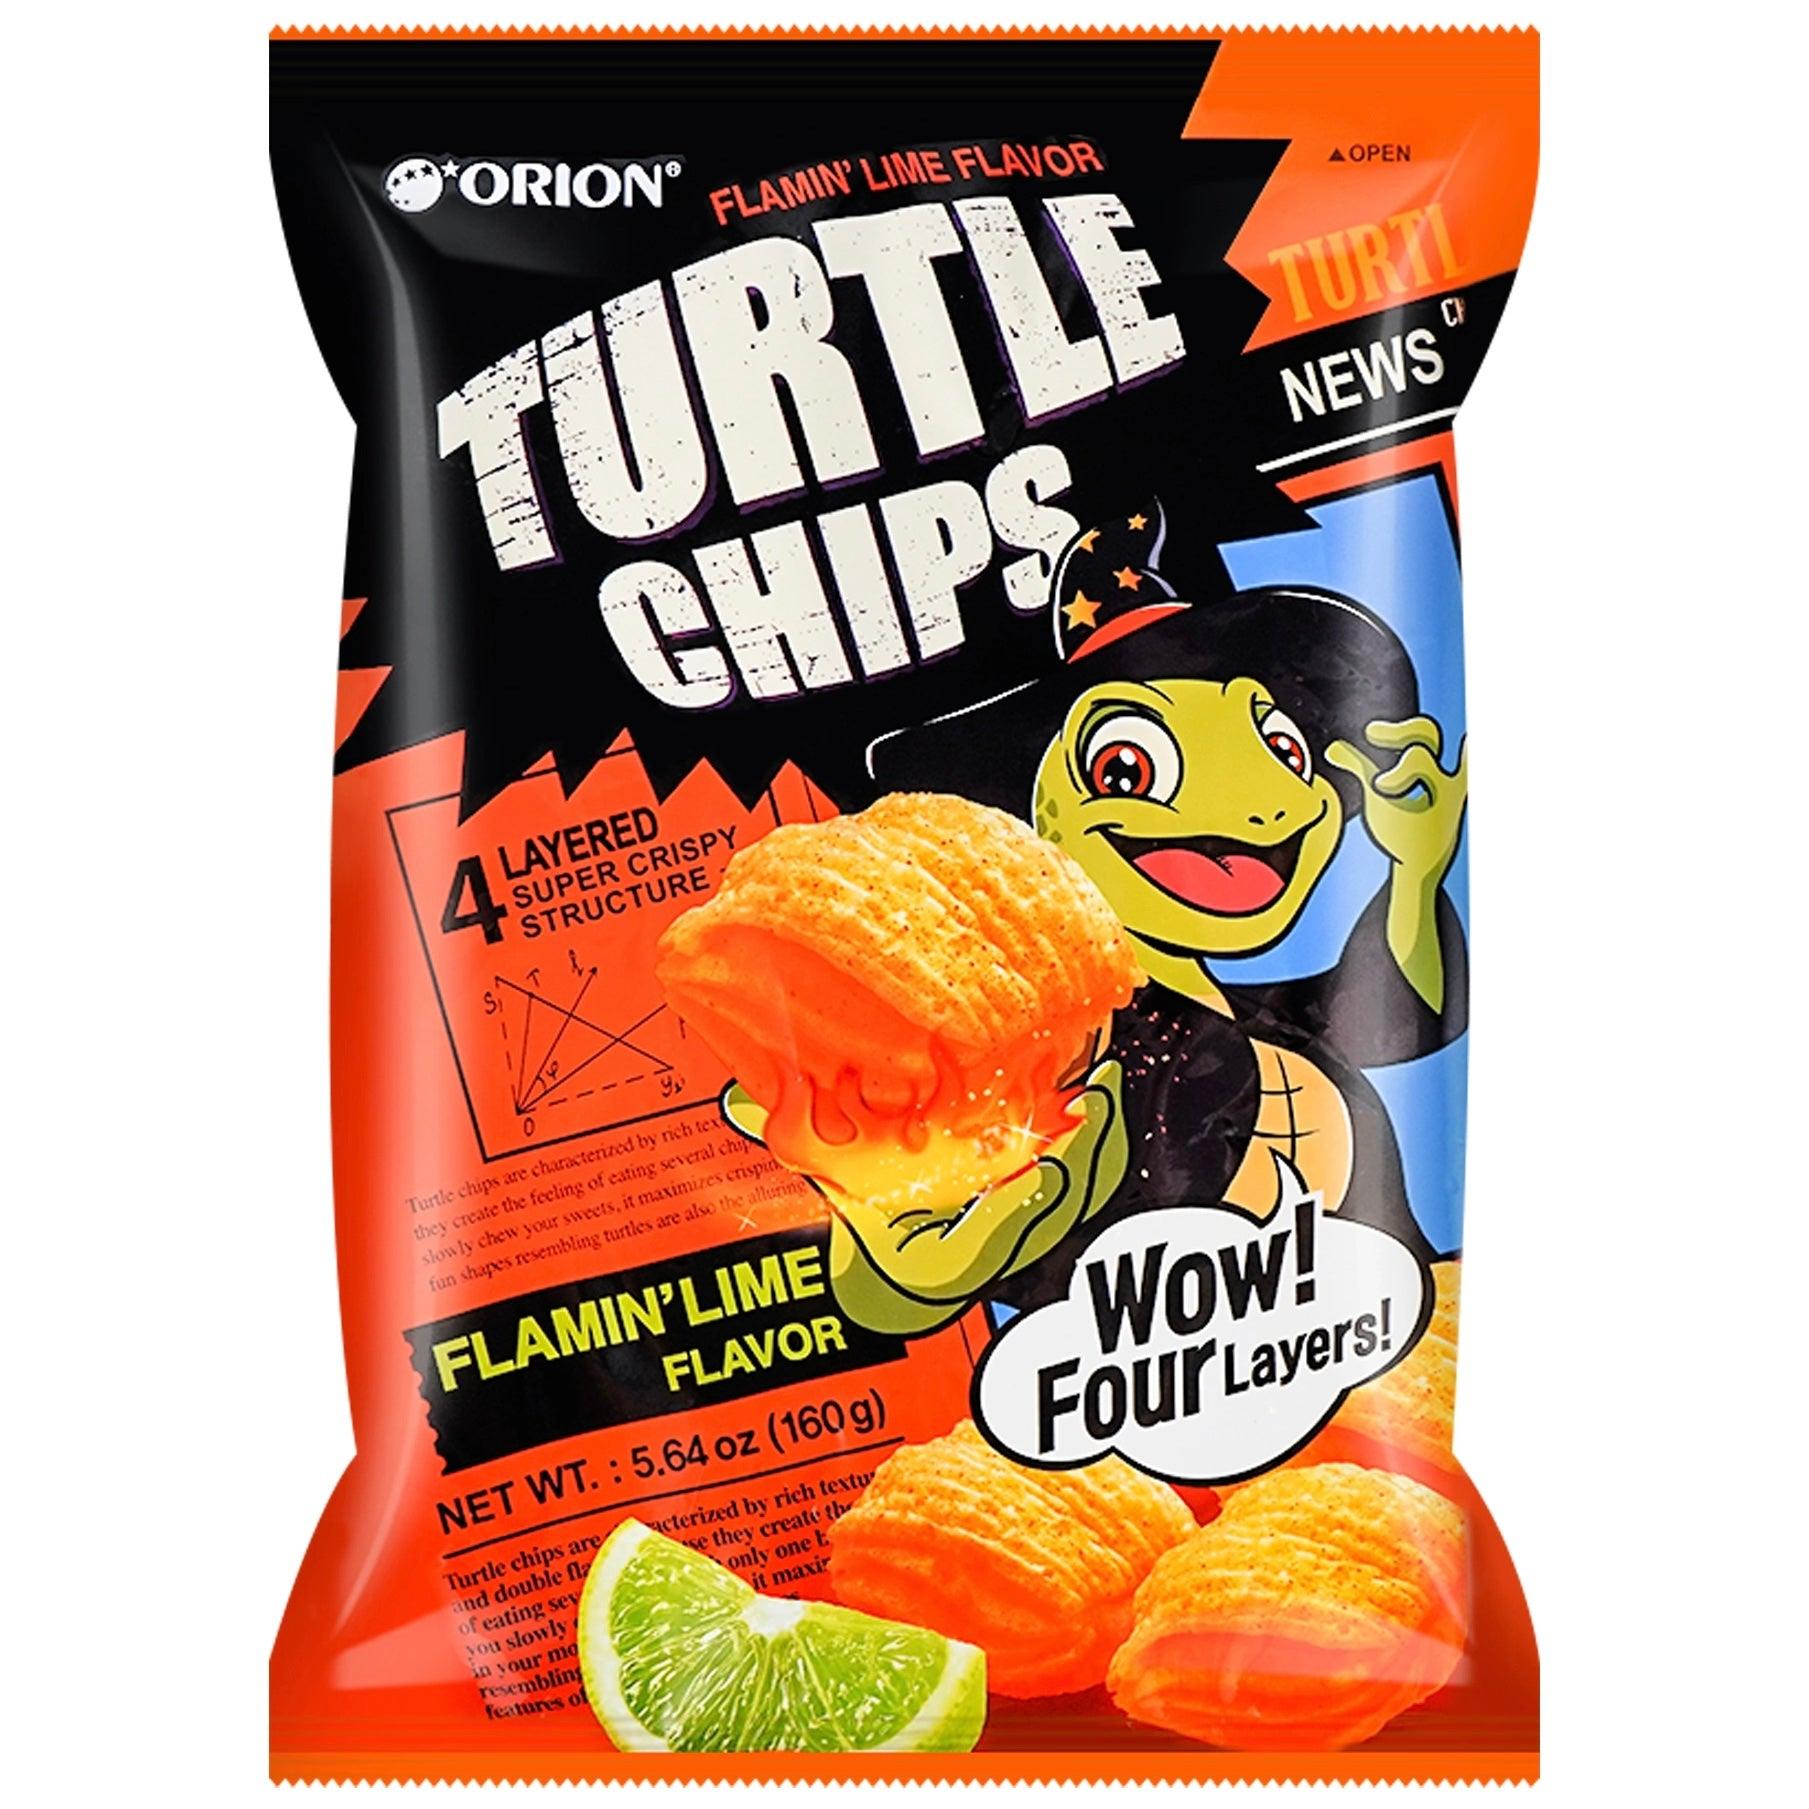 Orion Turtle Chips Flamin’ Lime 160g - The Snacks Box - Asian Snacks Store - The Snacks Box - Korean Snack - Japanese Snack